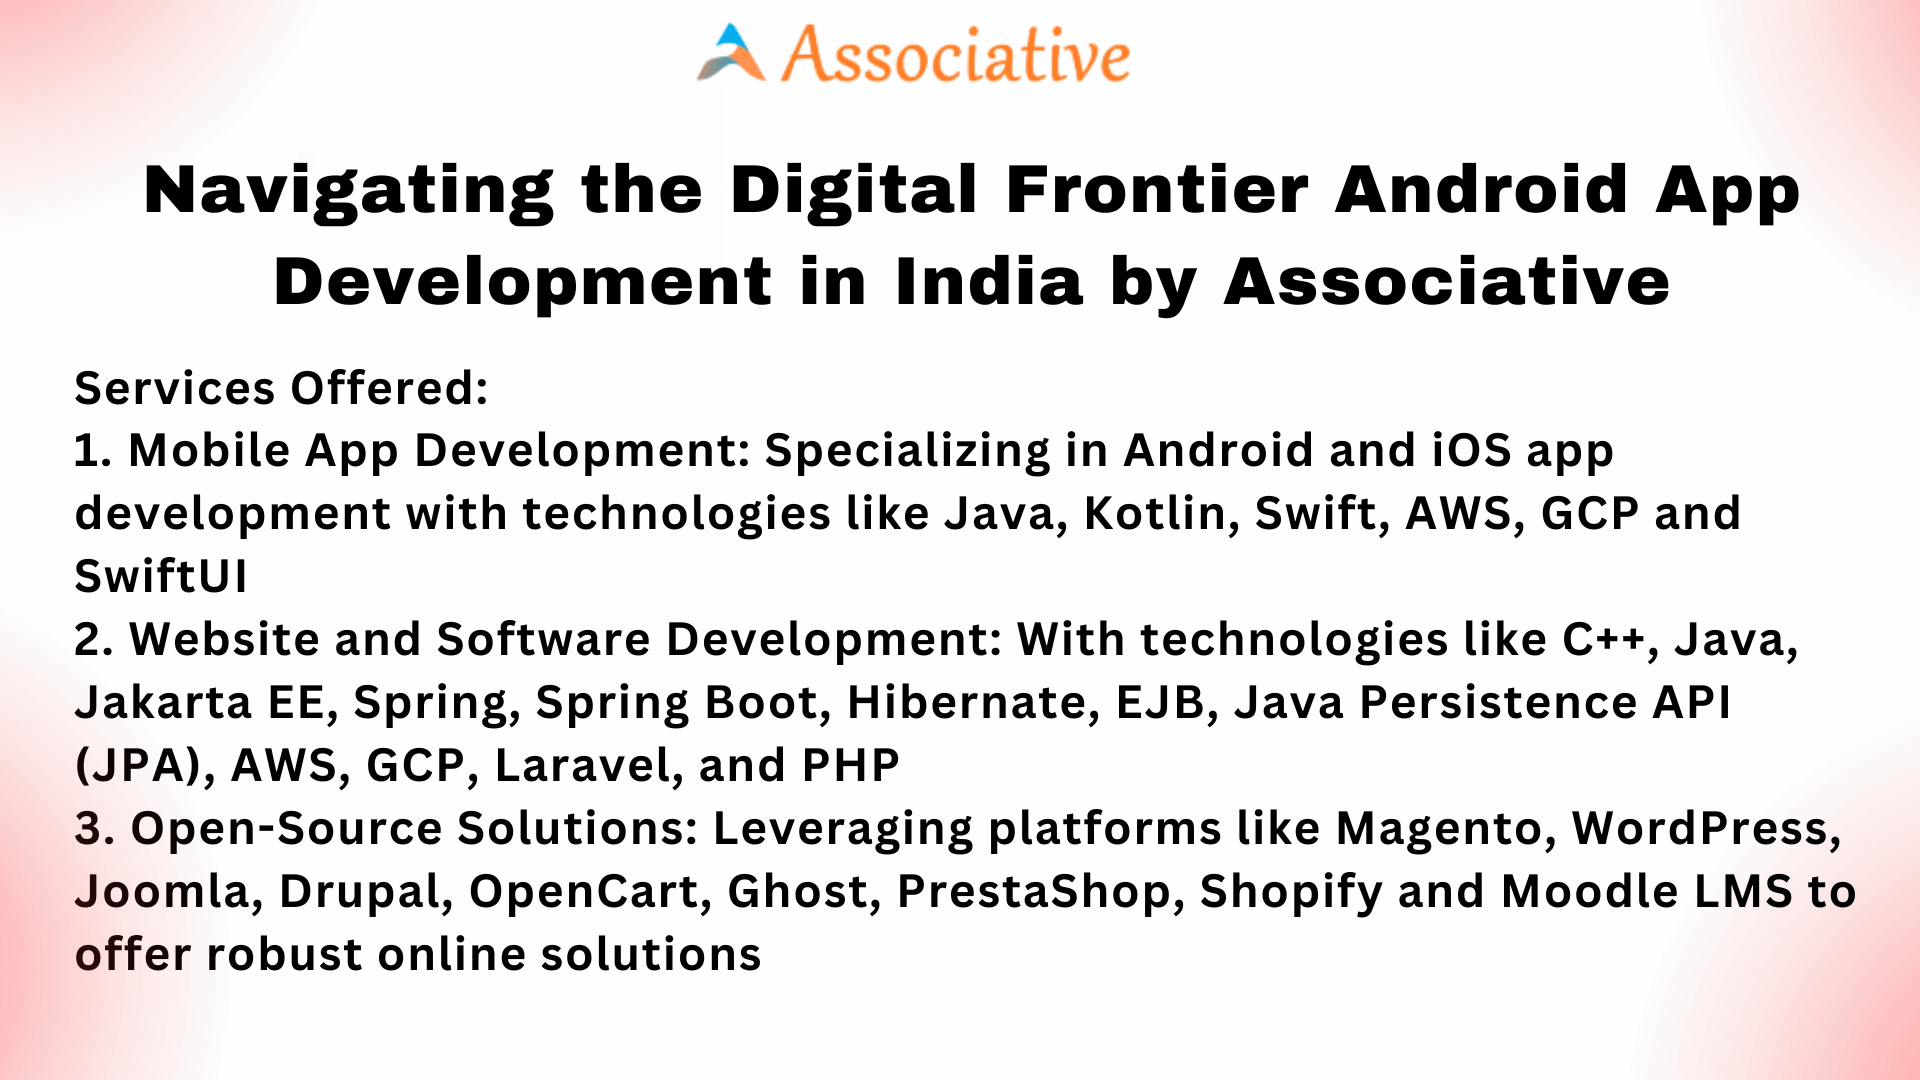 Navigating the Digital Frontier Android App Development in India by Associative